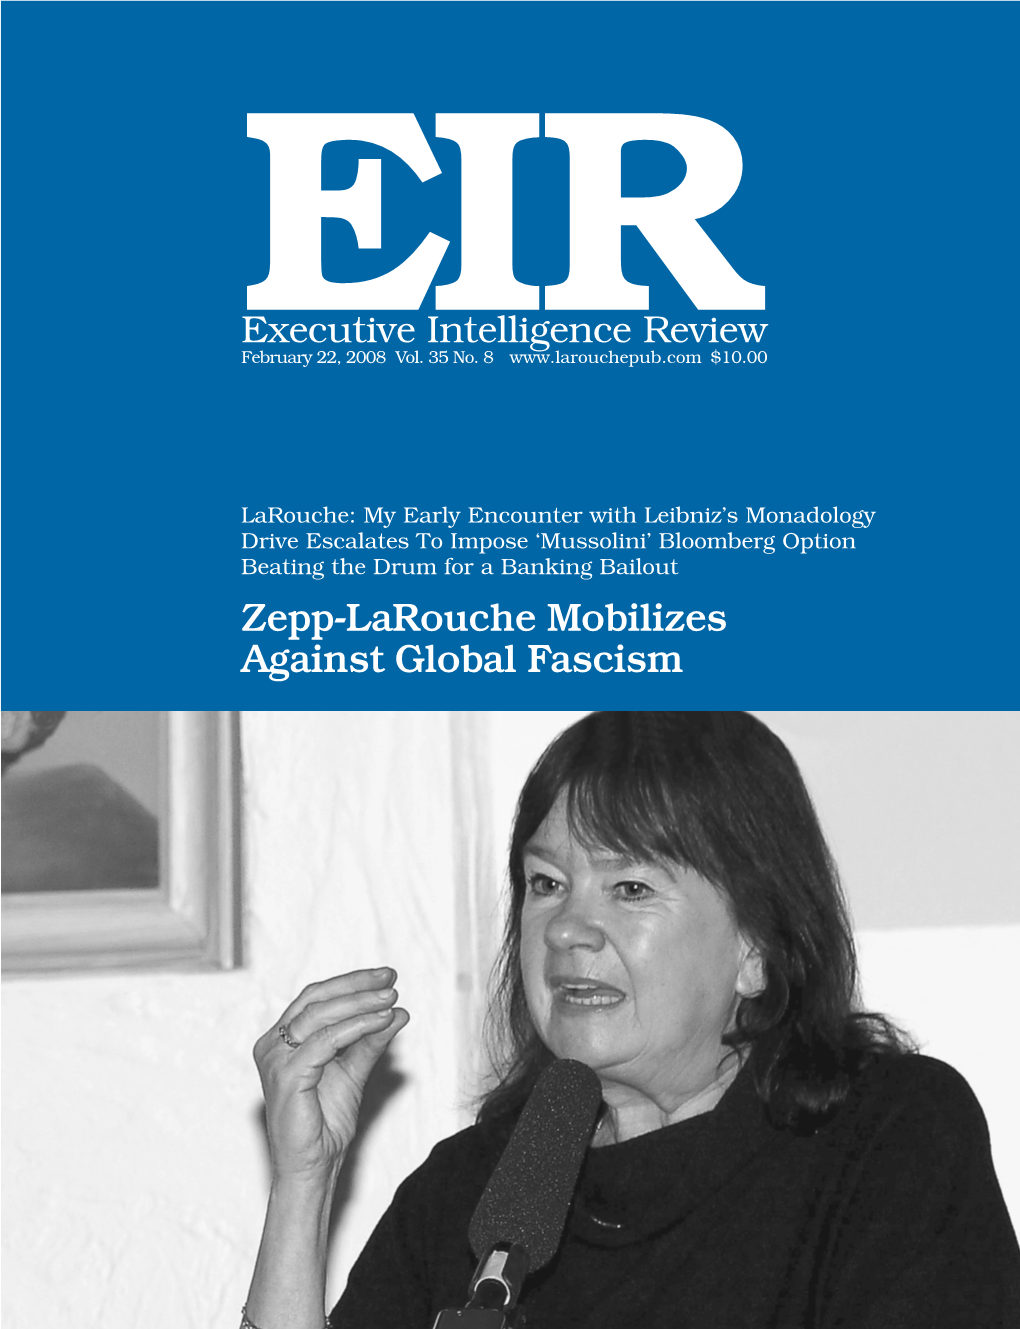 Executive Intelligence Review, Volume 35, Number 8, February 22